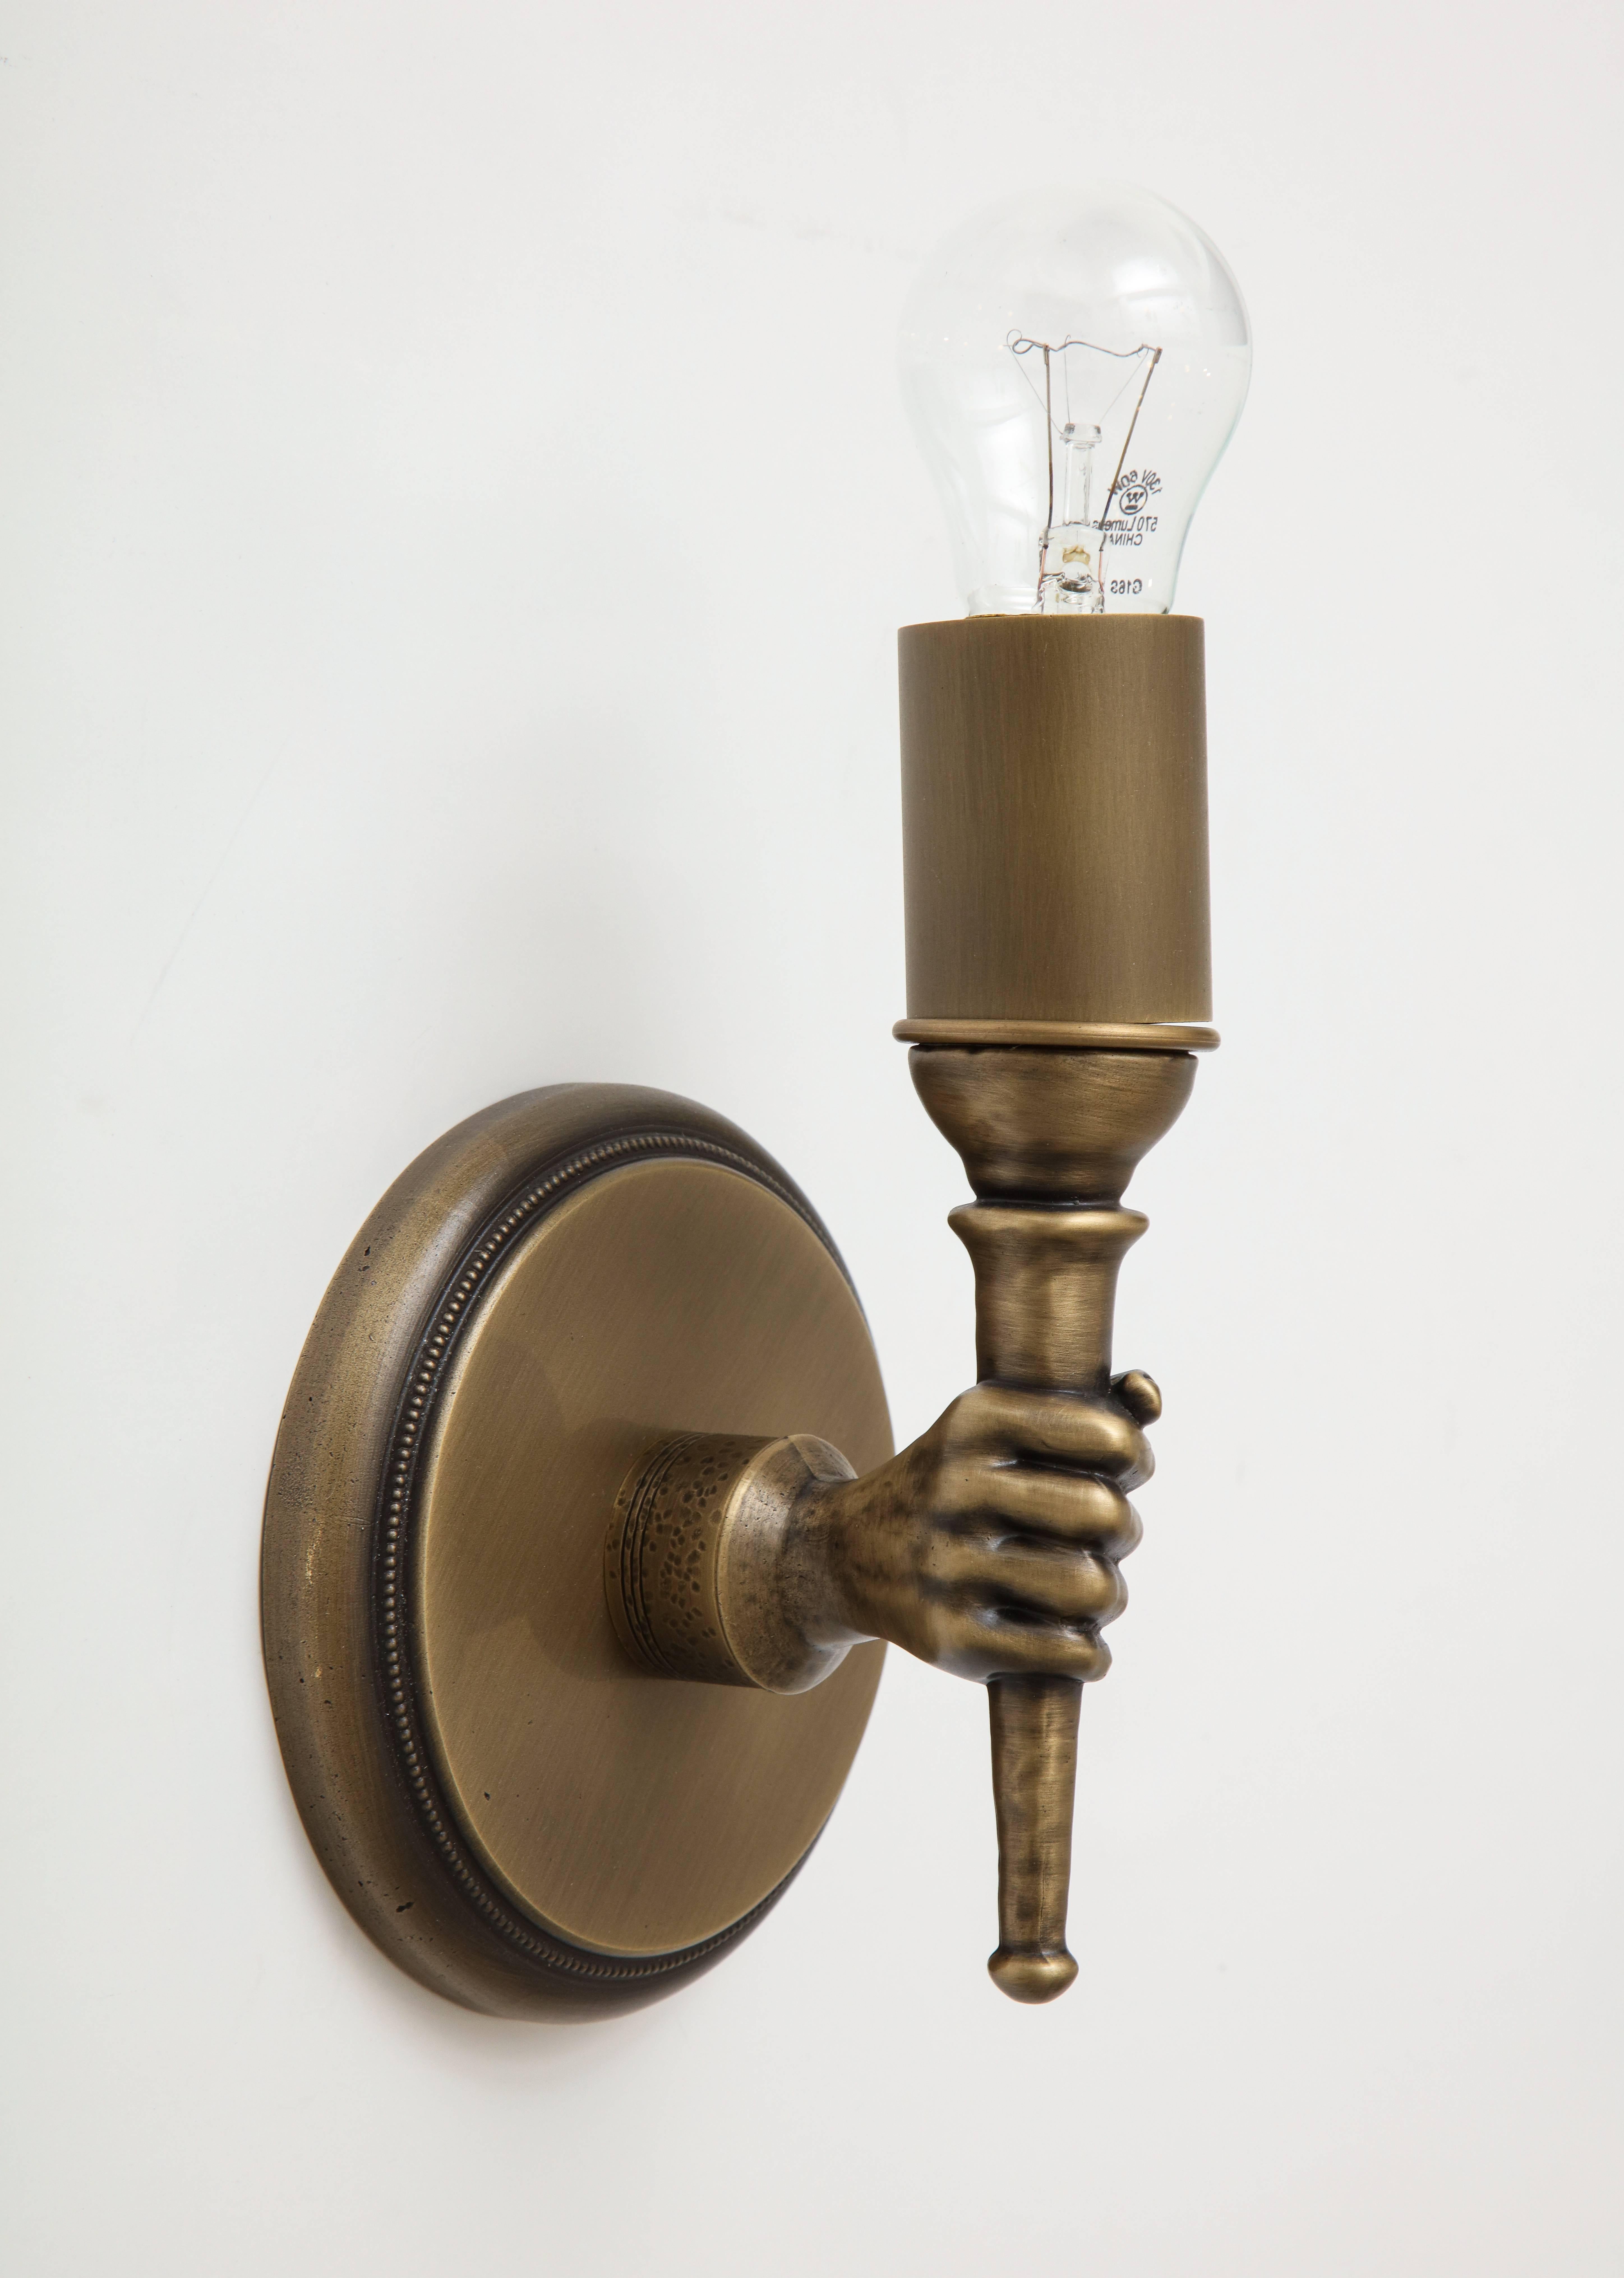 Solid cast, this whimsical yet elegant sconce is a perfect conversation piece for a hallway or powder room.

This fixture includes elements that have been hand-cast in an artisan studio.

Please note that pitting created in this classic technique is